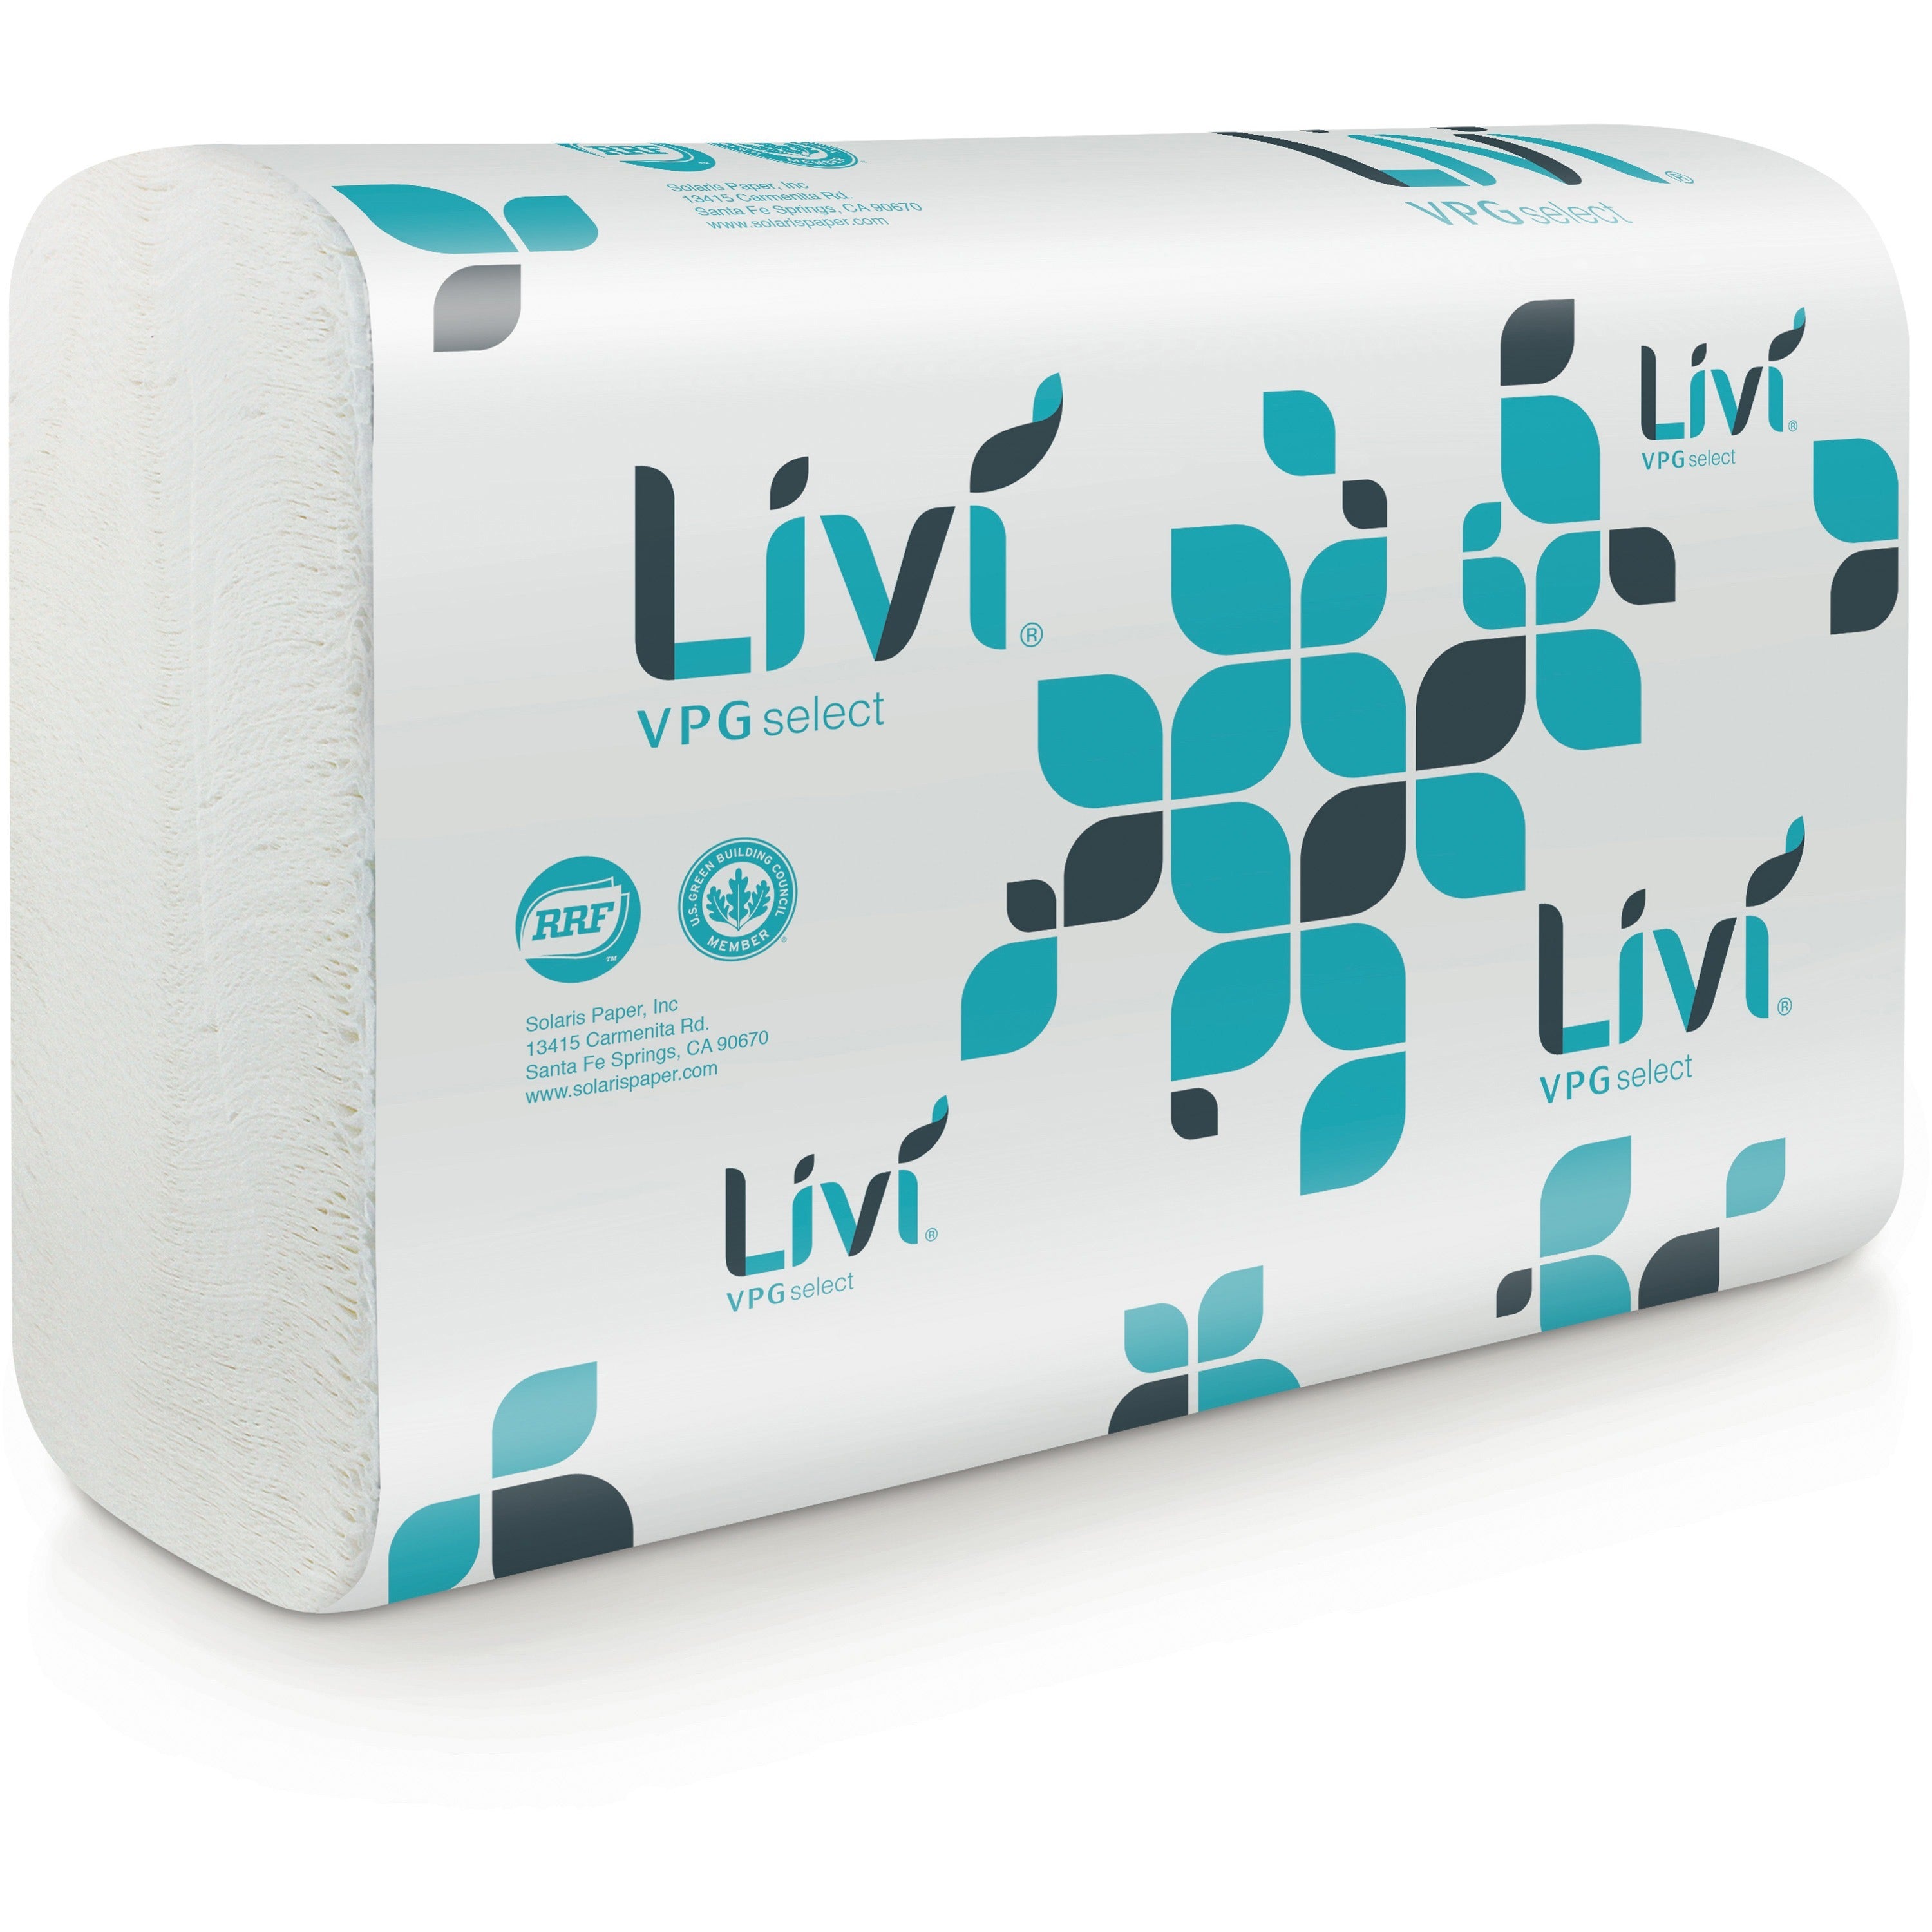 livi-vpg-select-multifold-towel-1-ply-multifold-906-x-945-white-virgin-fiber-soft-embossed-absorbent-eco-friendly-for-office-building-250-per-pack-16-carton_sol43514 - 1